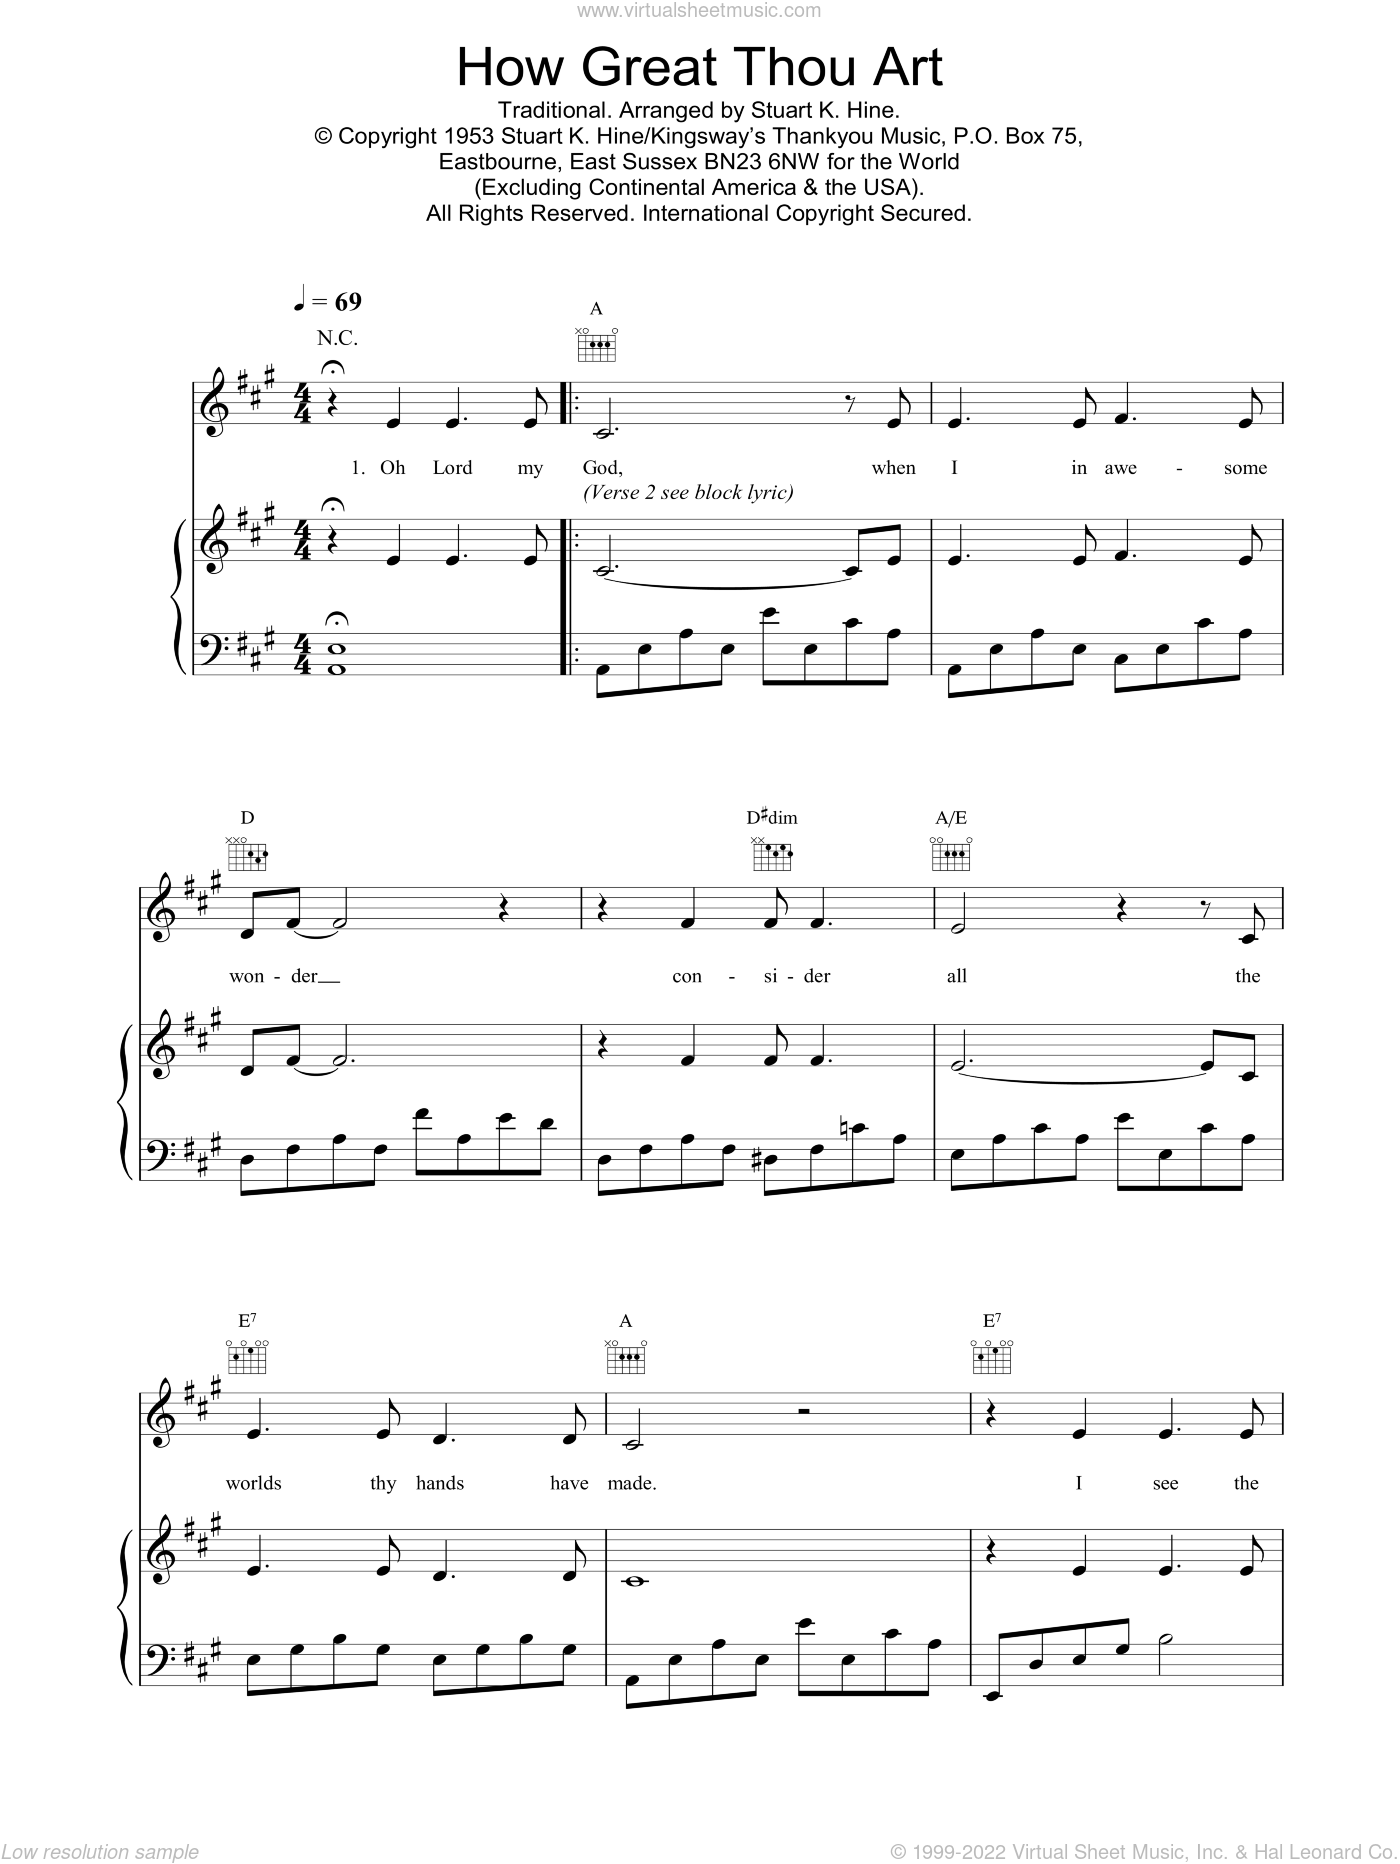 how great thou art chords key of g